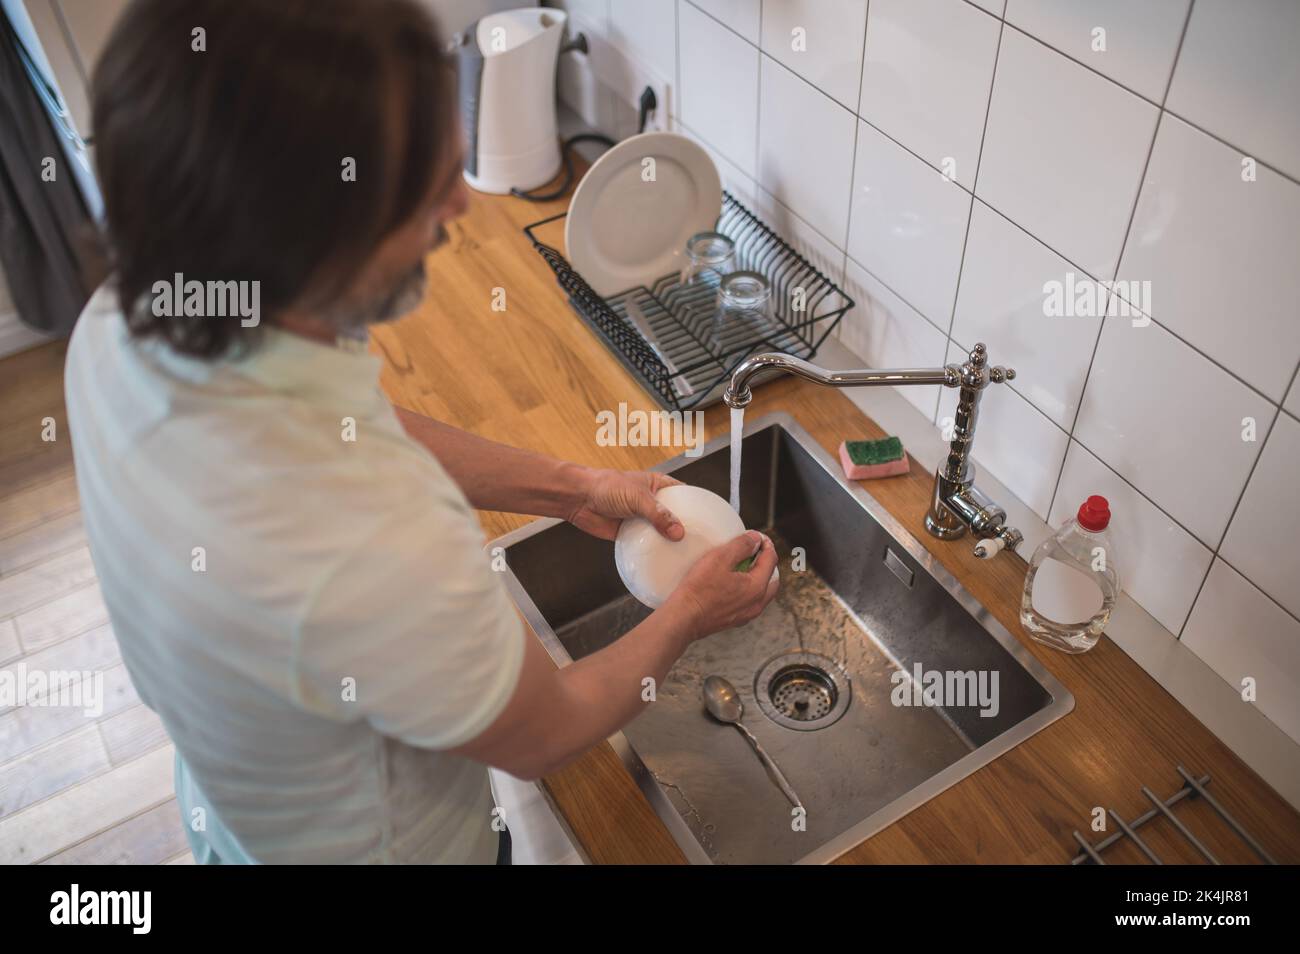 Man in the kitchen washing the dishes and doing some housework Stock Photo